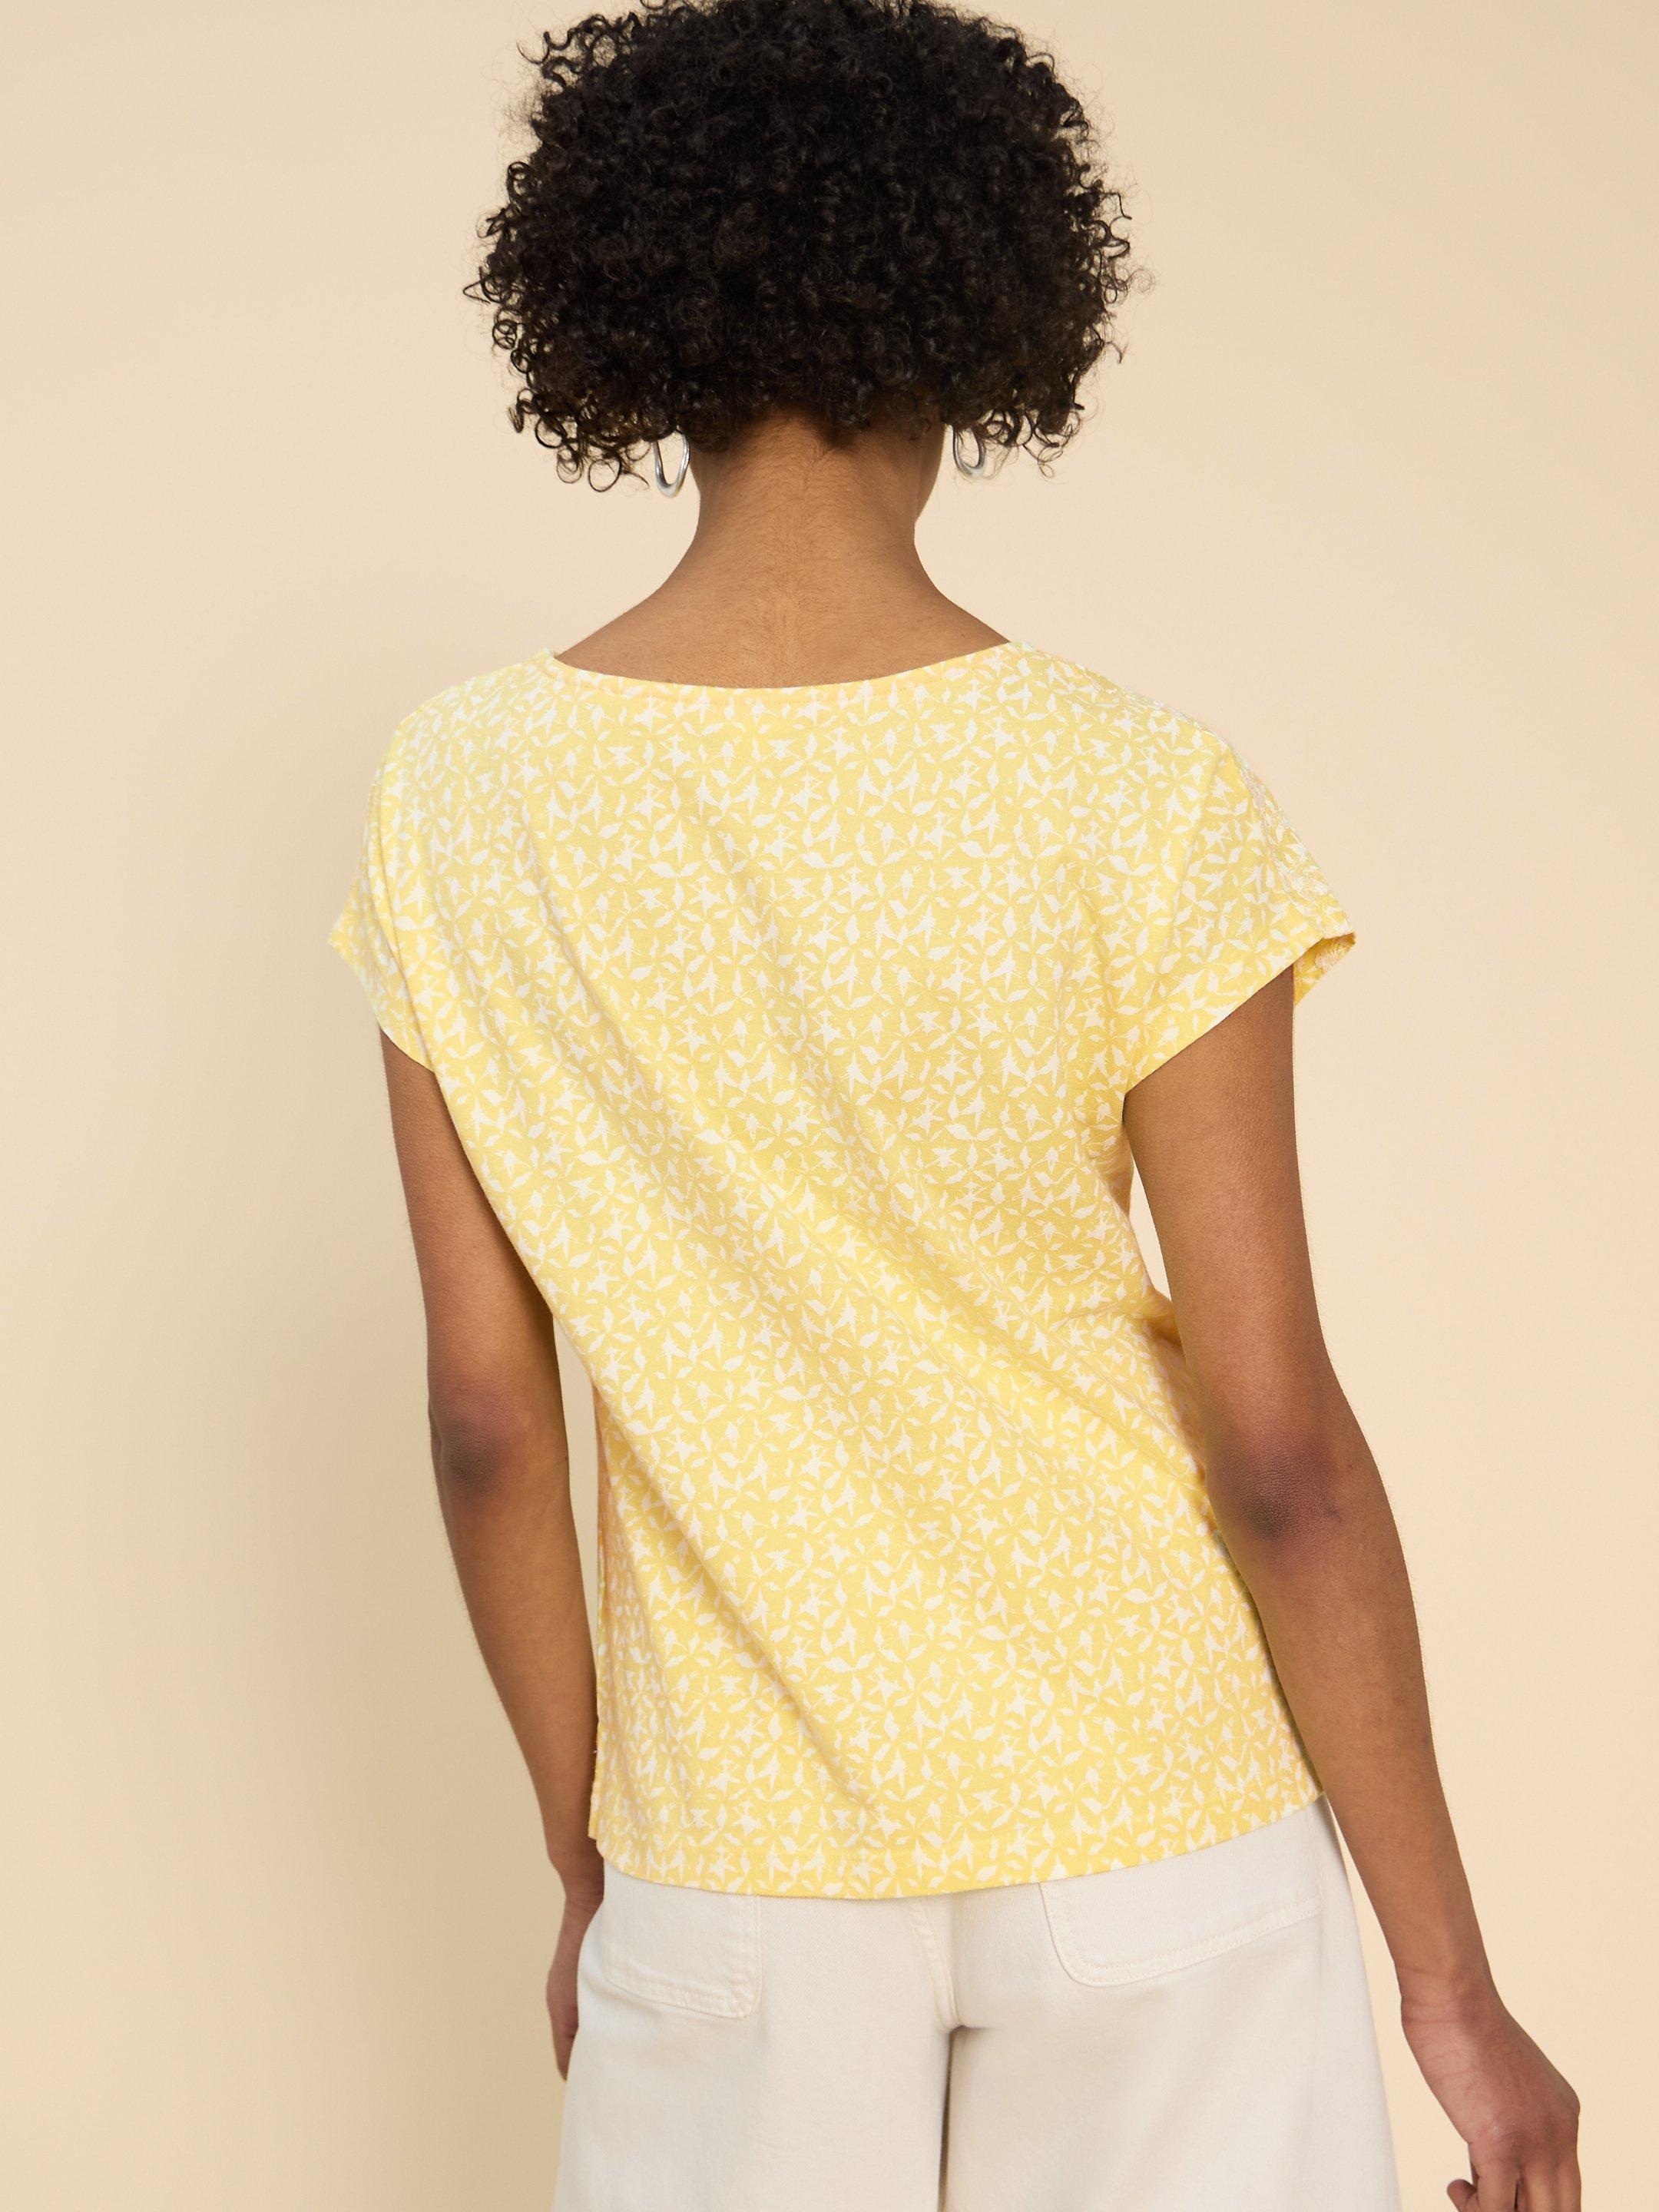 ANTHEA EMBROIDERY SHORT SLEEVE TOP in YELLOW PR - MODEL BACK